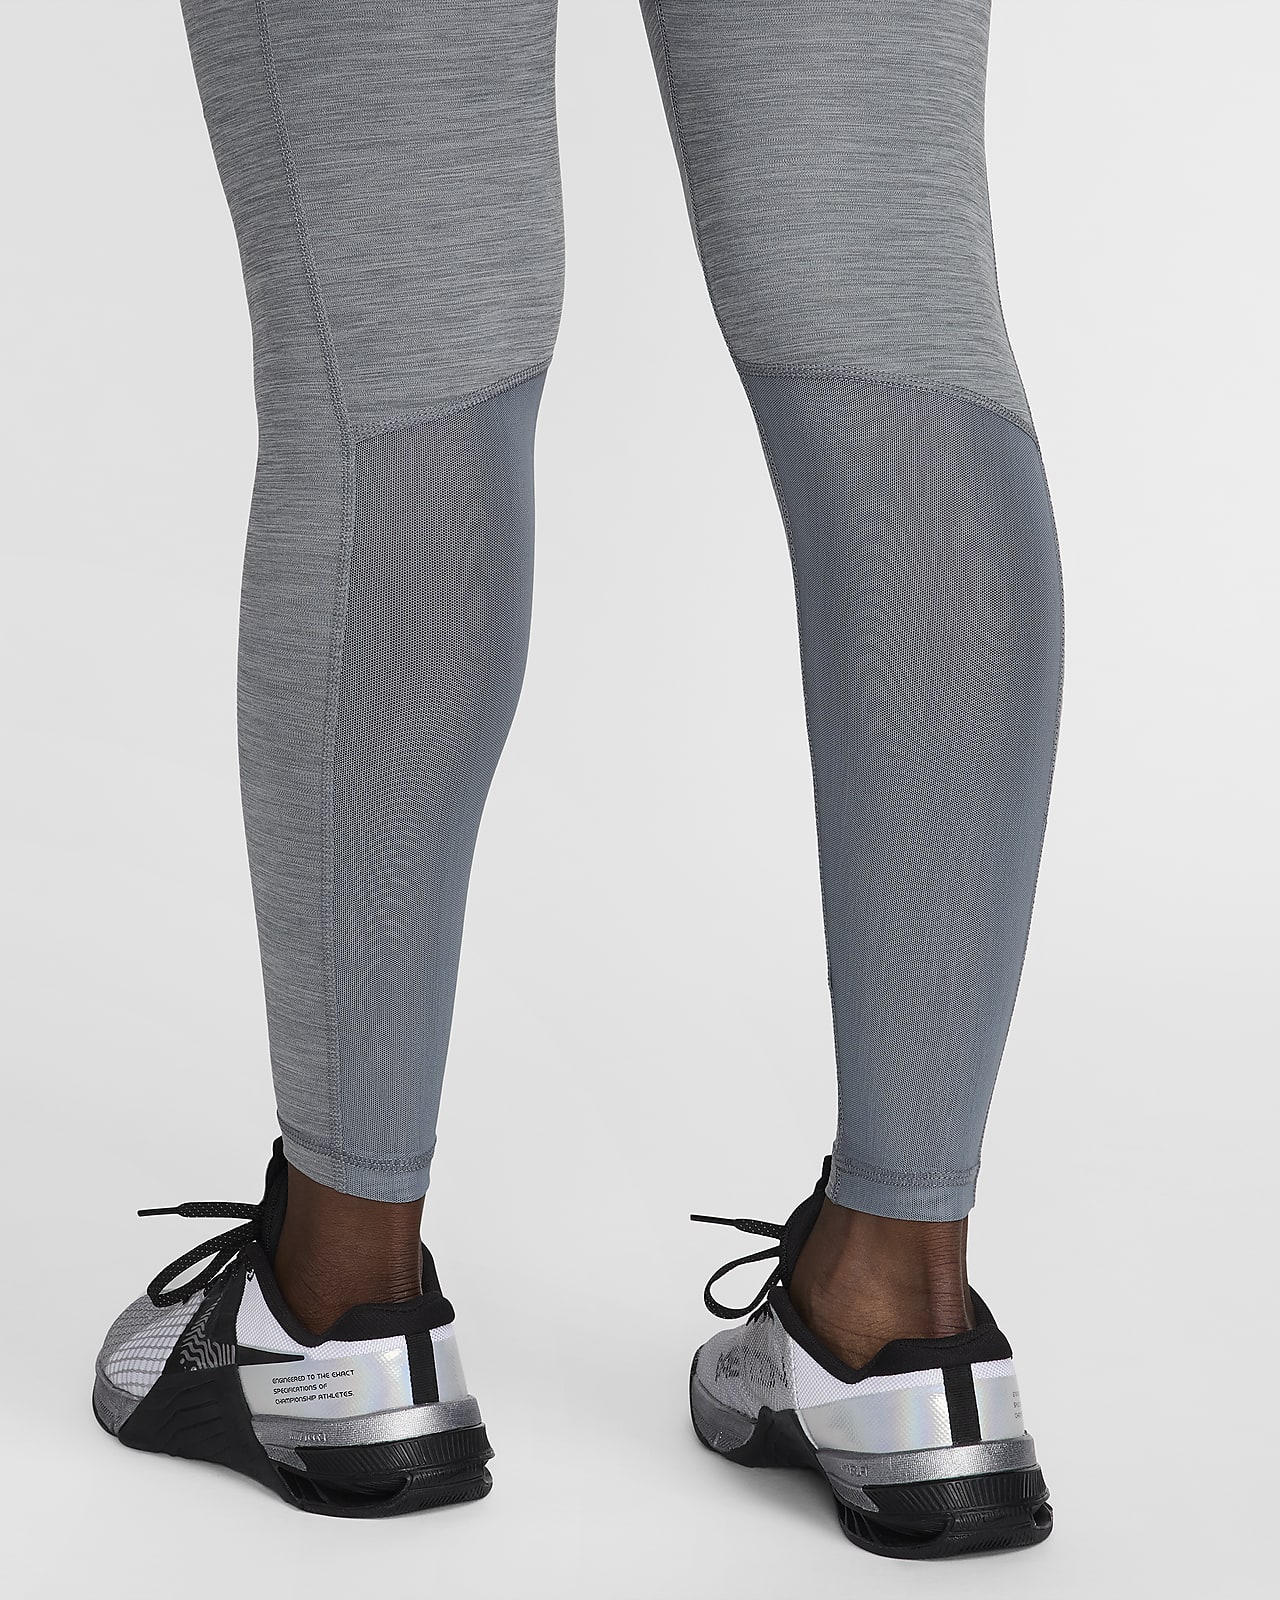 Nike Pro Women's Tights - Serving Aces